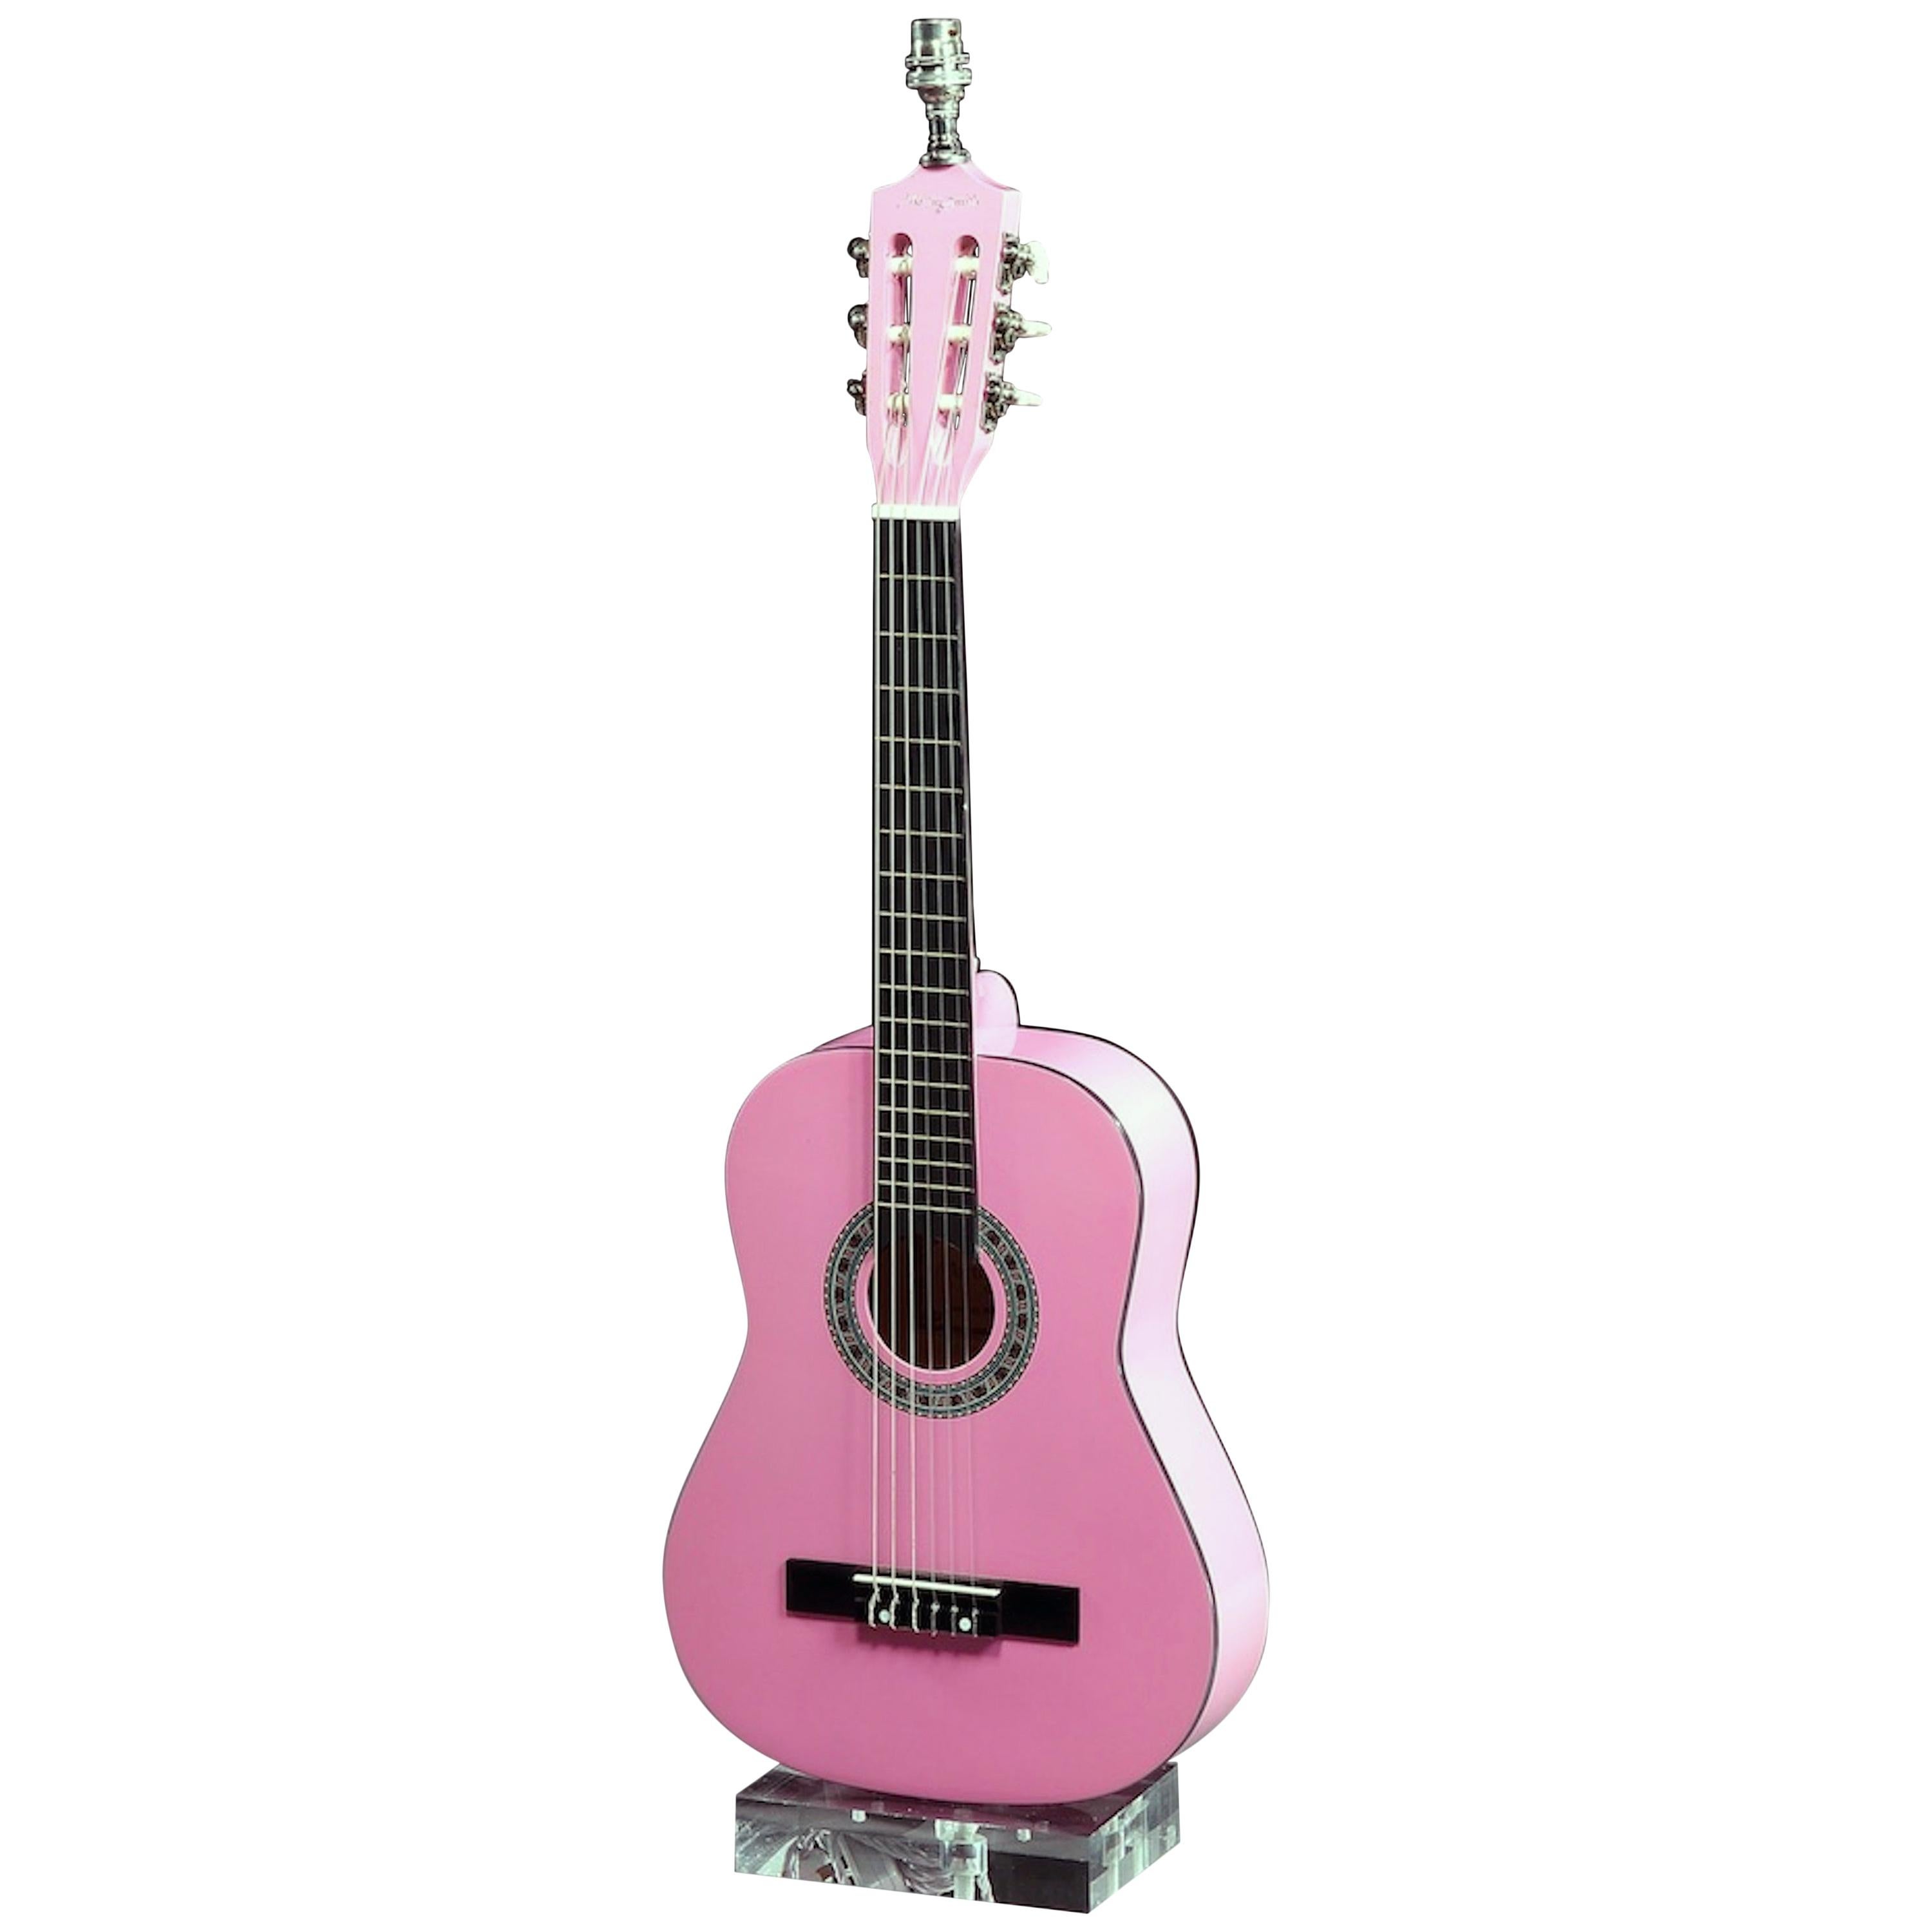 Table Lamp, Martin Smith, Classical Acoustic Guitar, Pink Rock and Roll